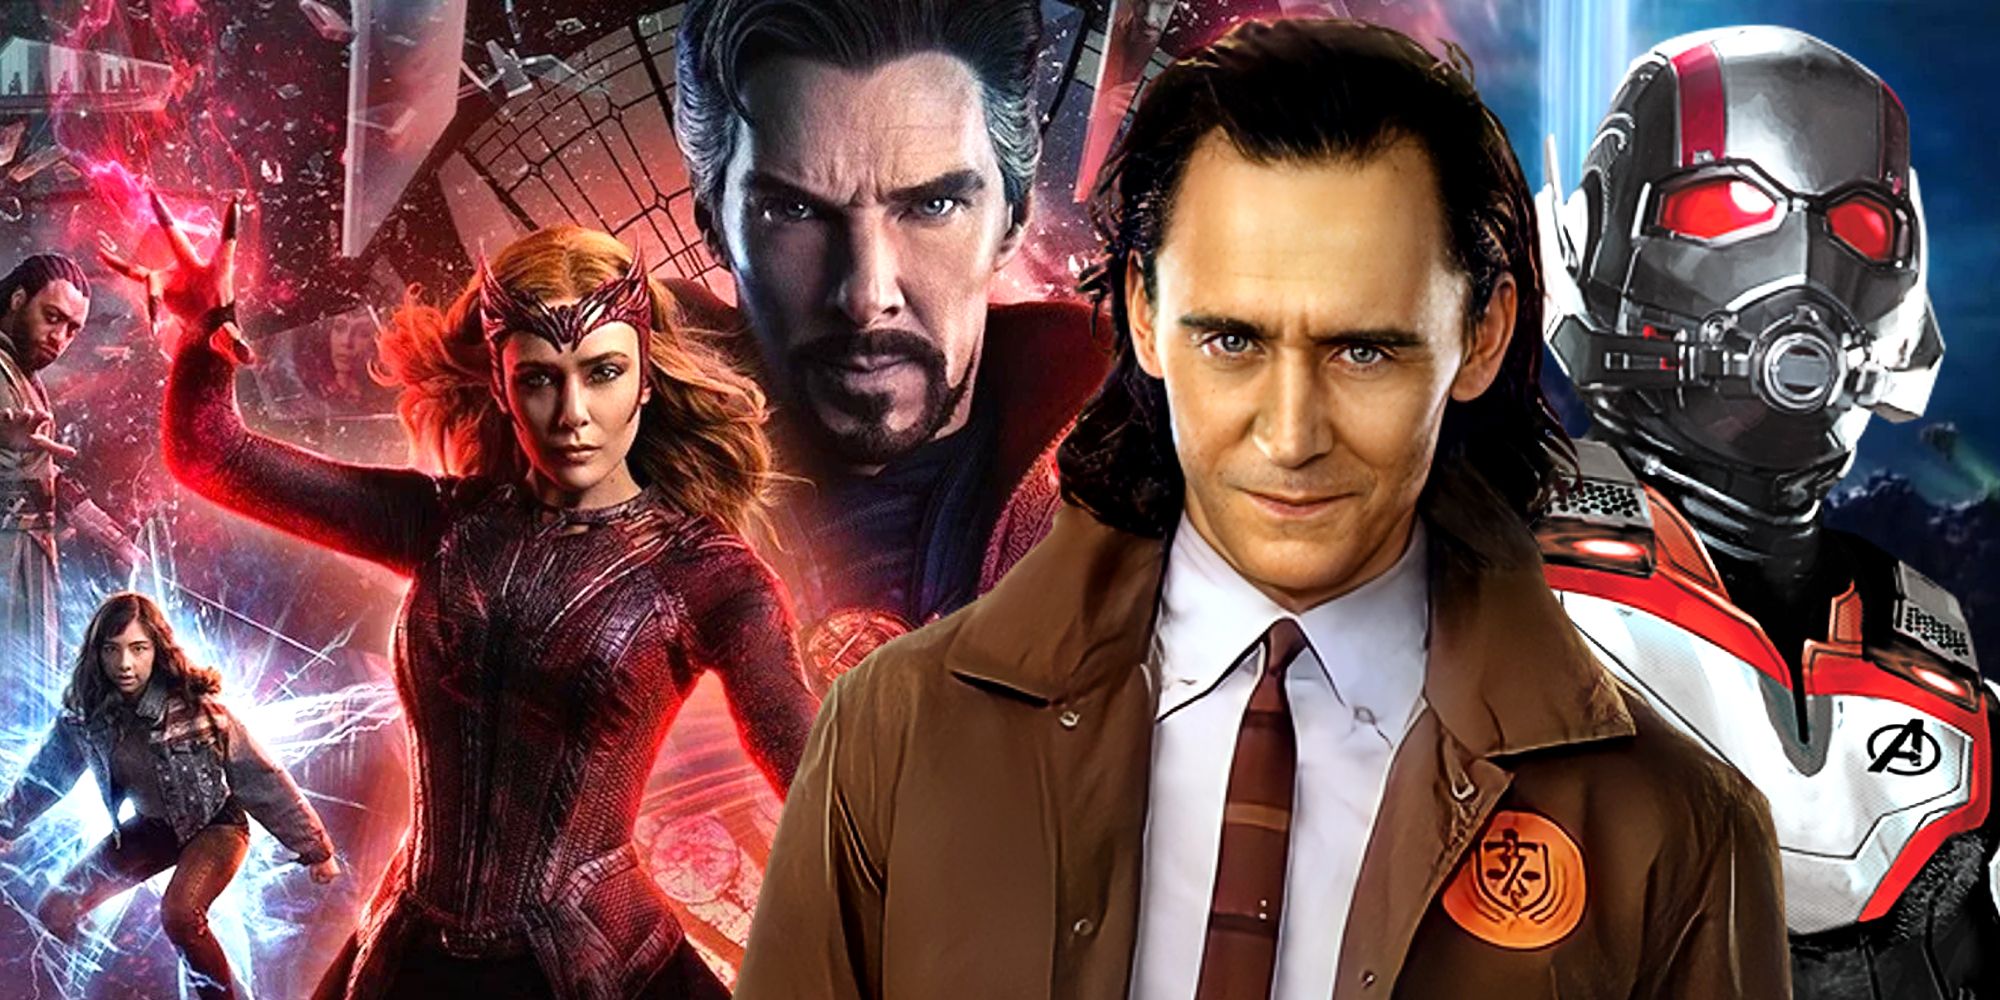 Doctor Strange, Scarlet Witch, America Chavez, Loki, and Ant-Man Travel Through the MCU Multiverse